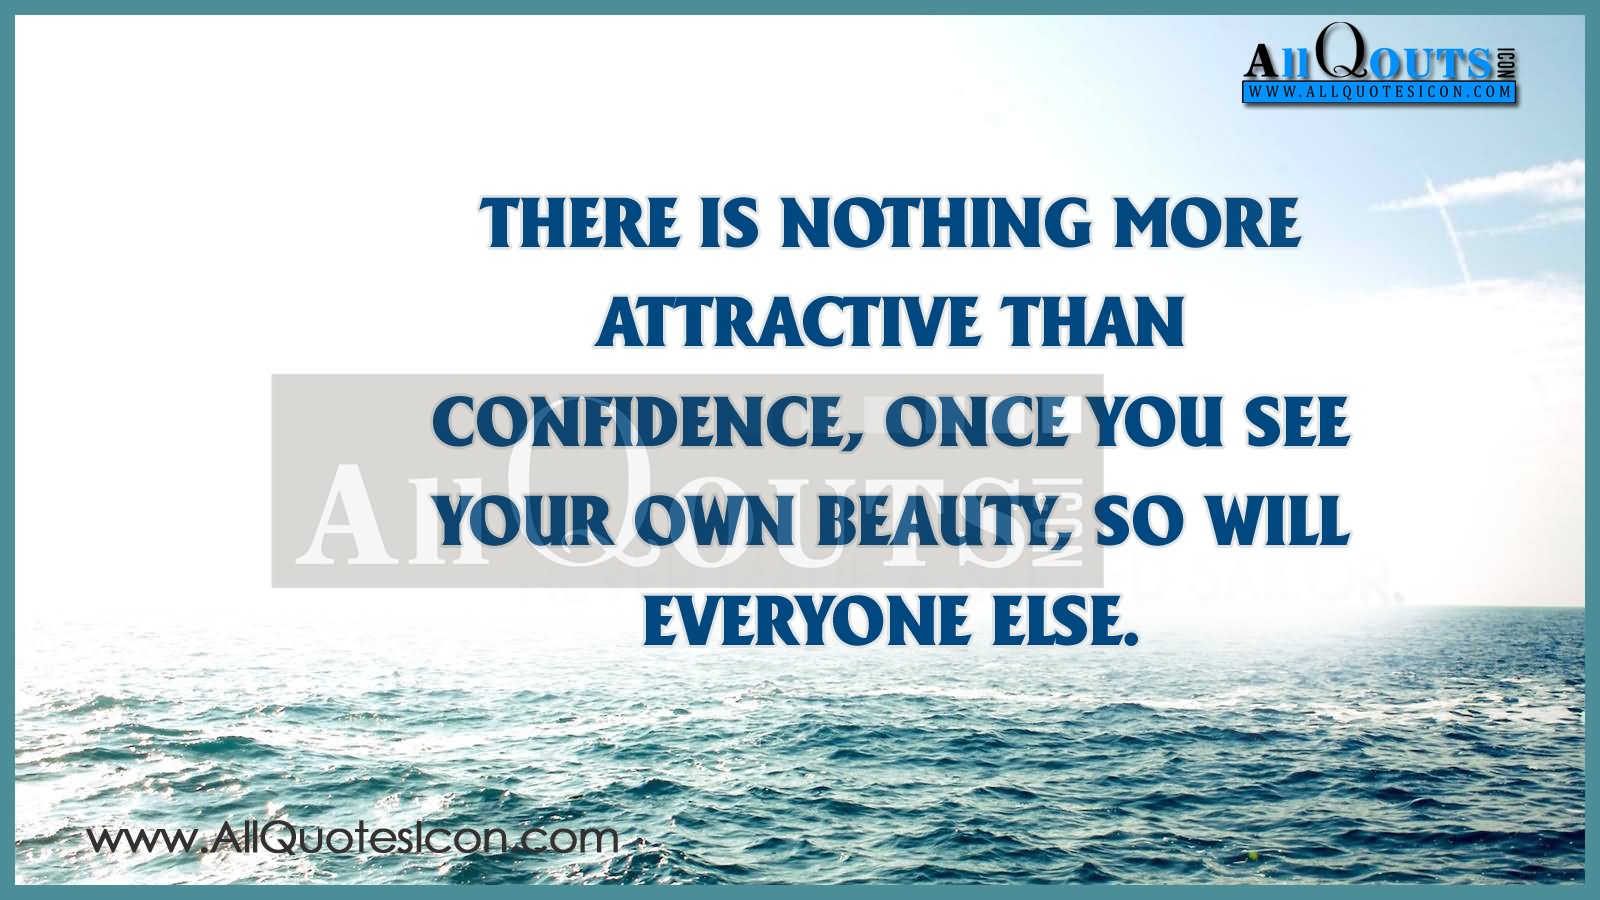 There is nothing more attractive than confidence, once you see your own beauty, so will everyone else.